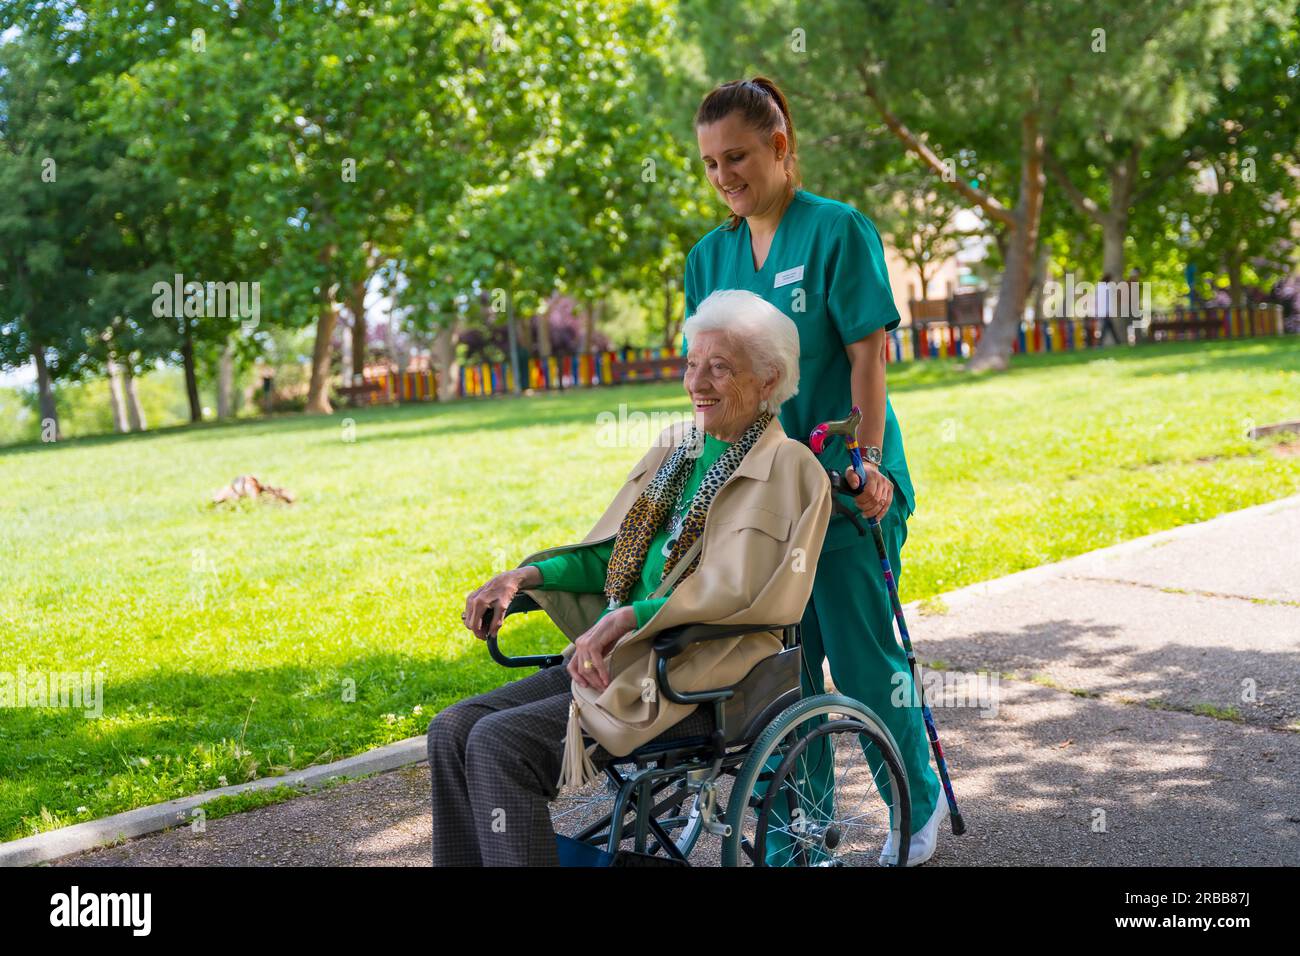 An elderly woman with the nurse on a walk through the garden of a nursing home in a wheelchair next to nature and trees Stock Photo